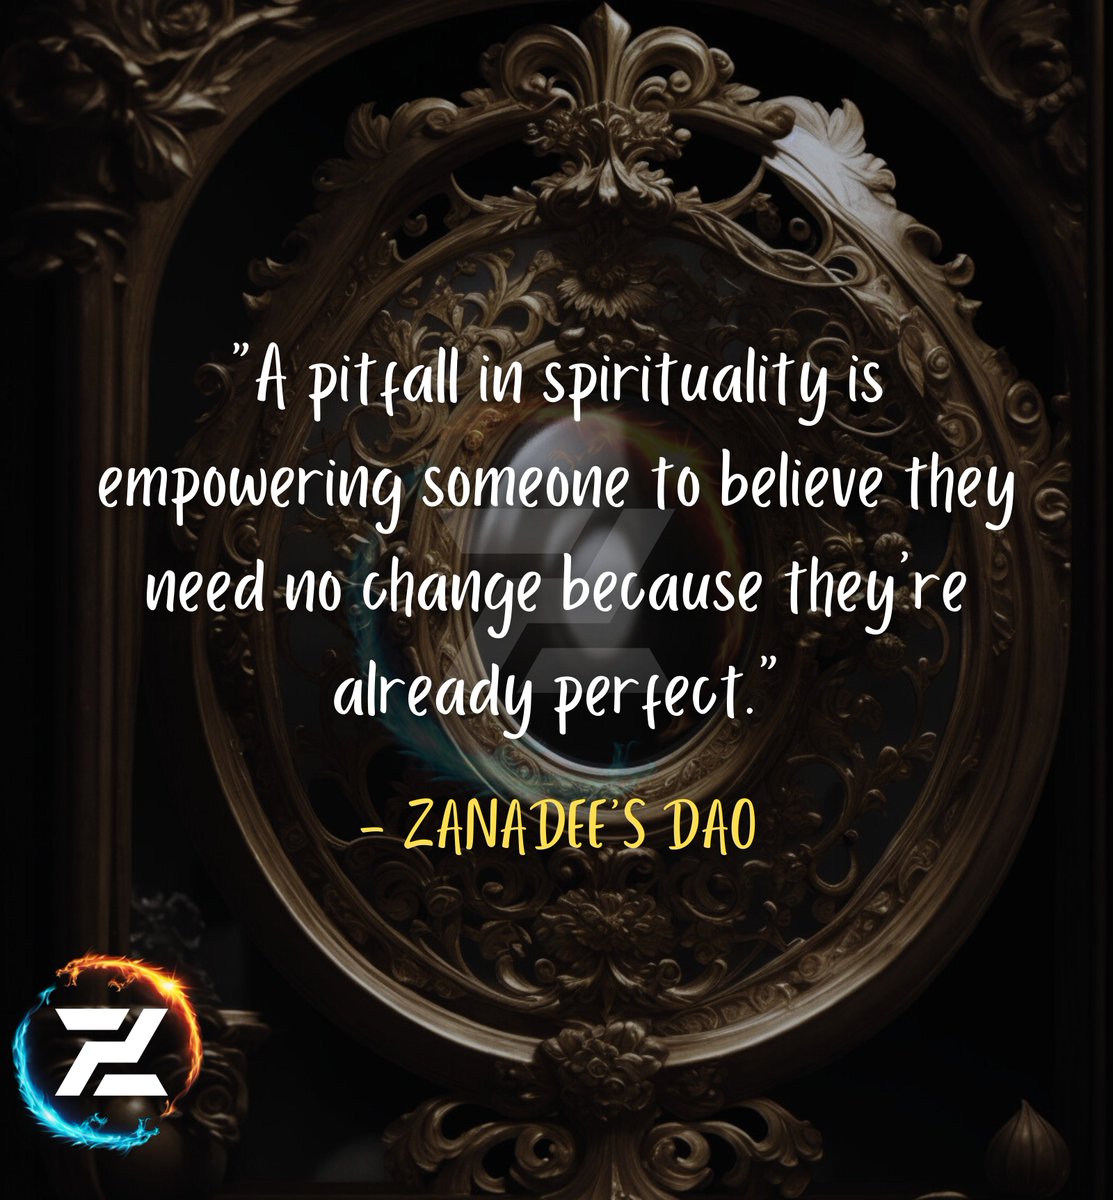 Perfection Paradox

“A pitfall in spirituality is empowering someone to believe they need no change because they’re already perfect.”

#Spirituality #SpiritualGrowth #SelfImprovement #Progress #Transformation

Zanadee’s Dao